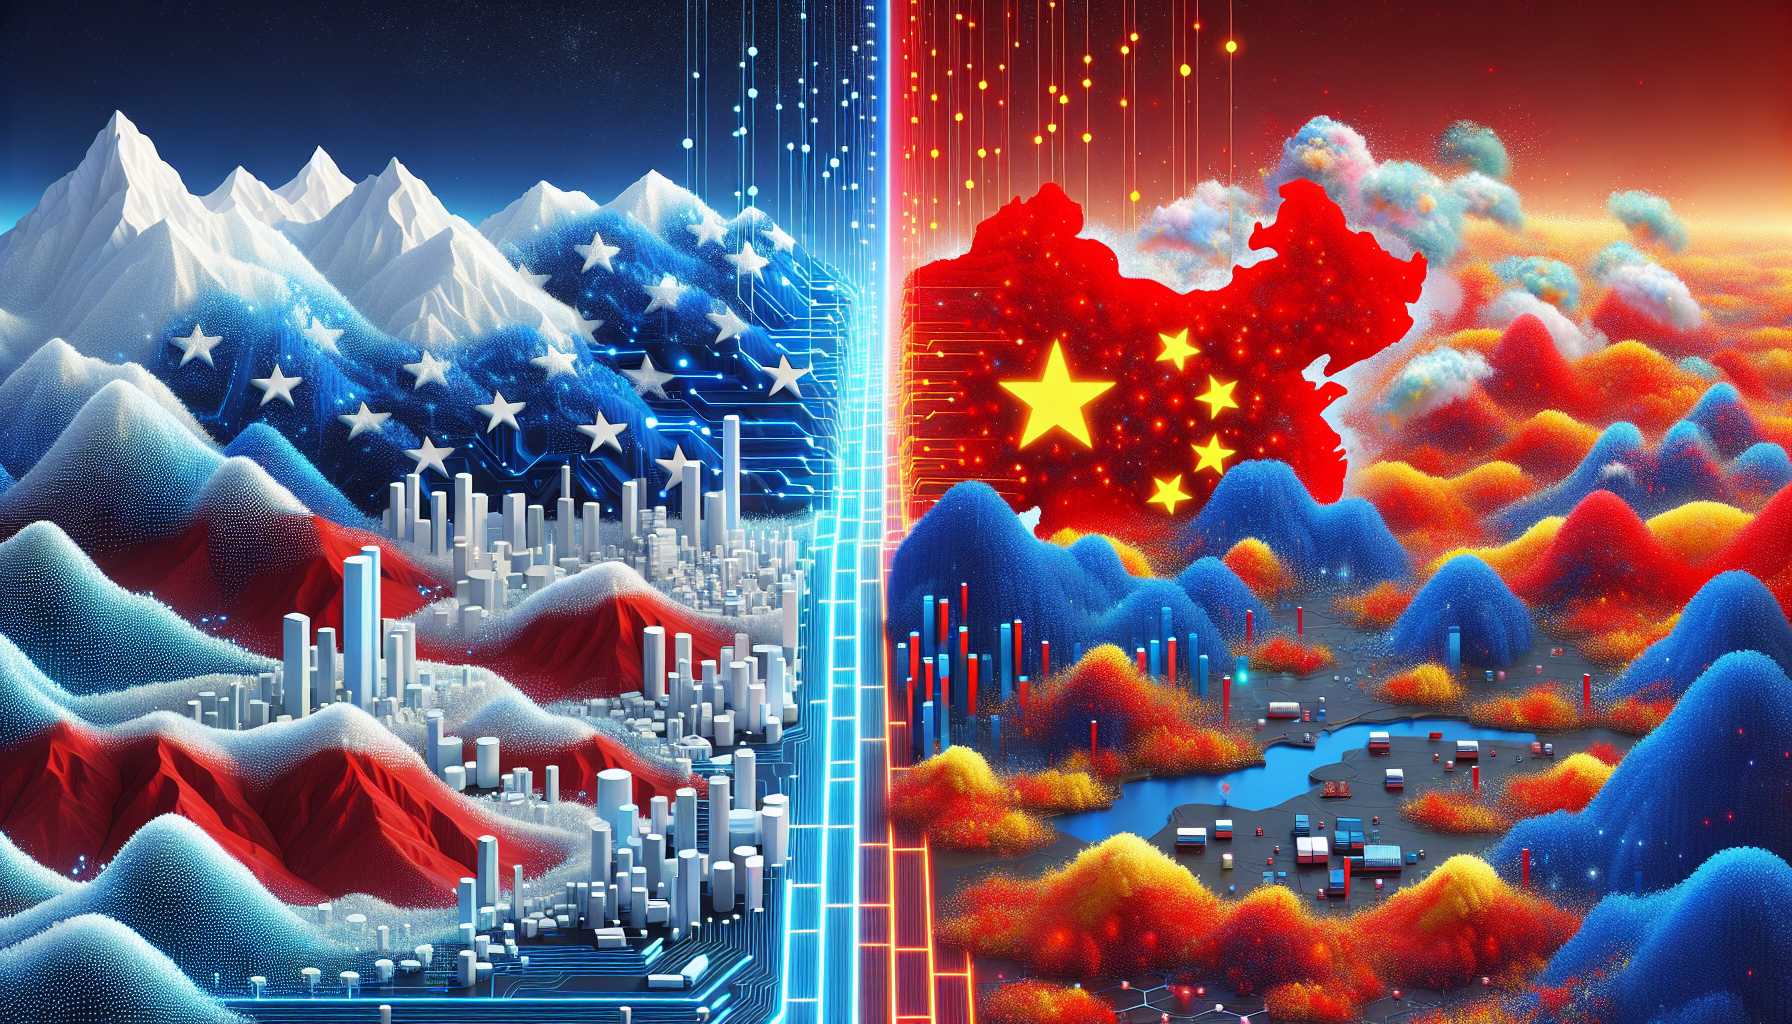 abstract depiction of the United States and China as opposing digital landscapes